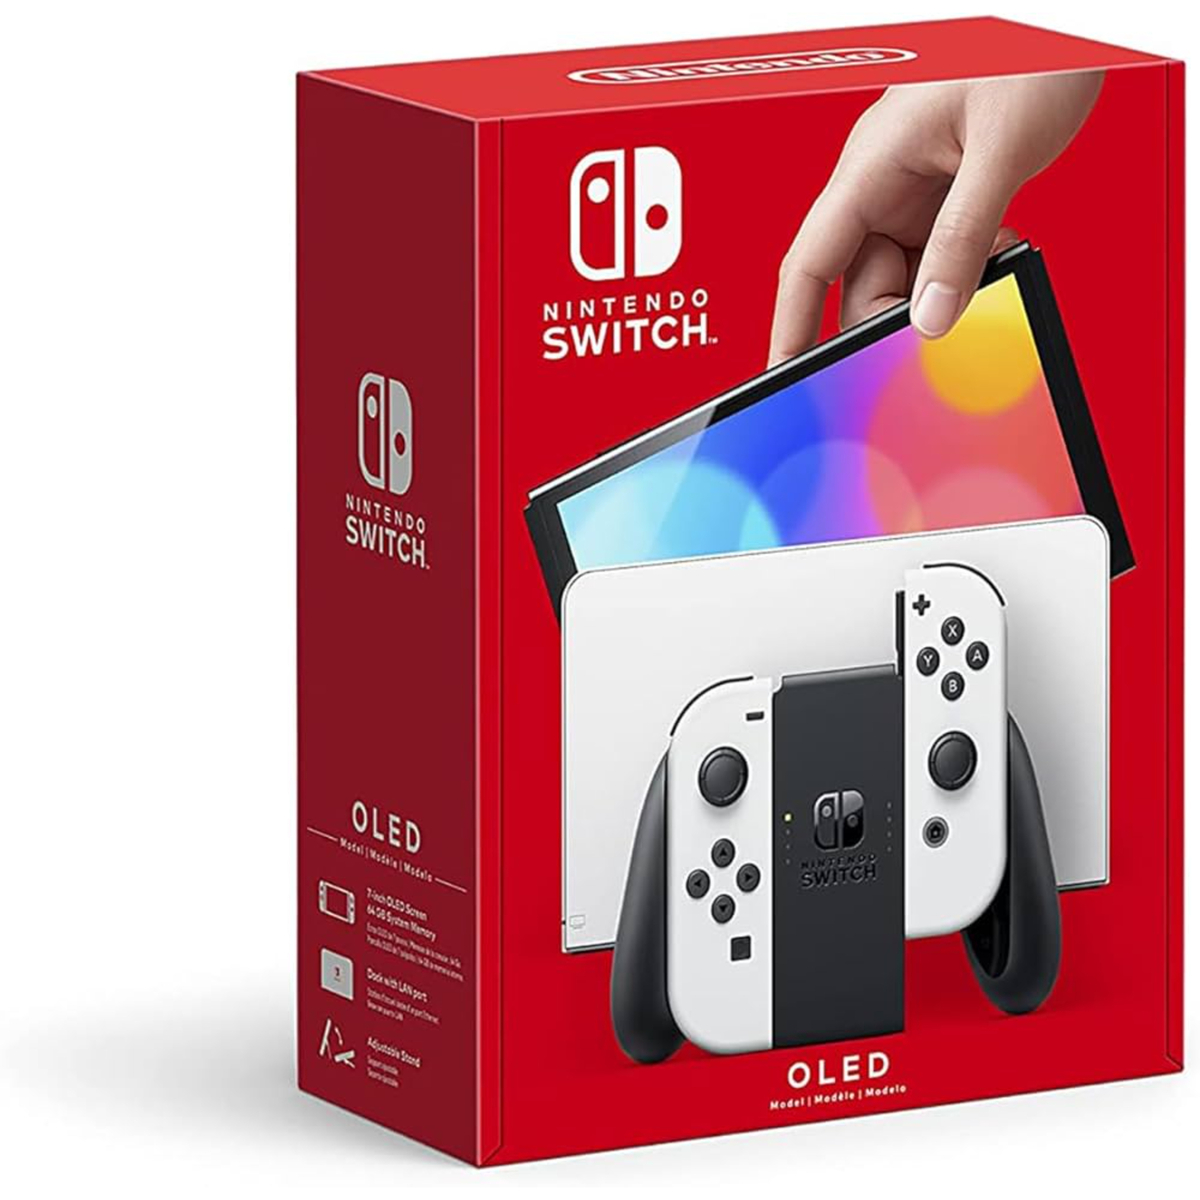 Nintendo Switch (OLED Model) -White+ Wireless Core Controller Red For Nintendo Switch +Nyko Swivel Grips